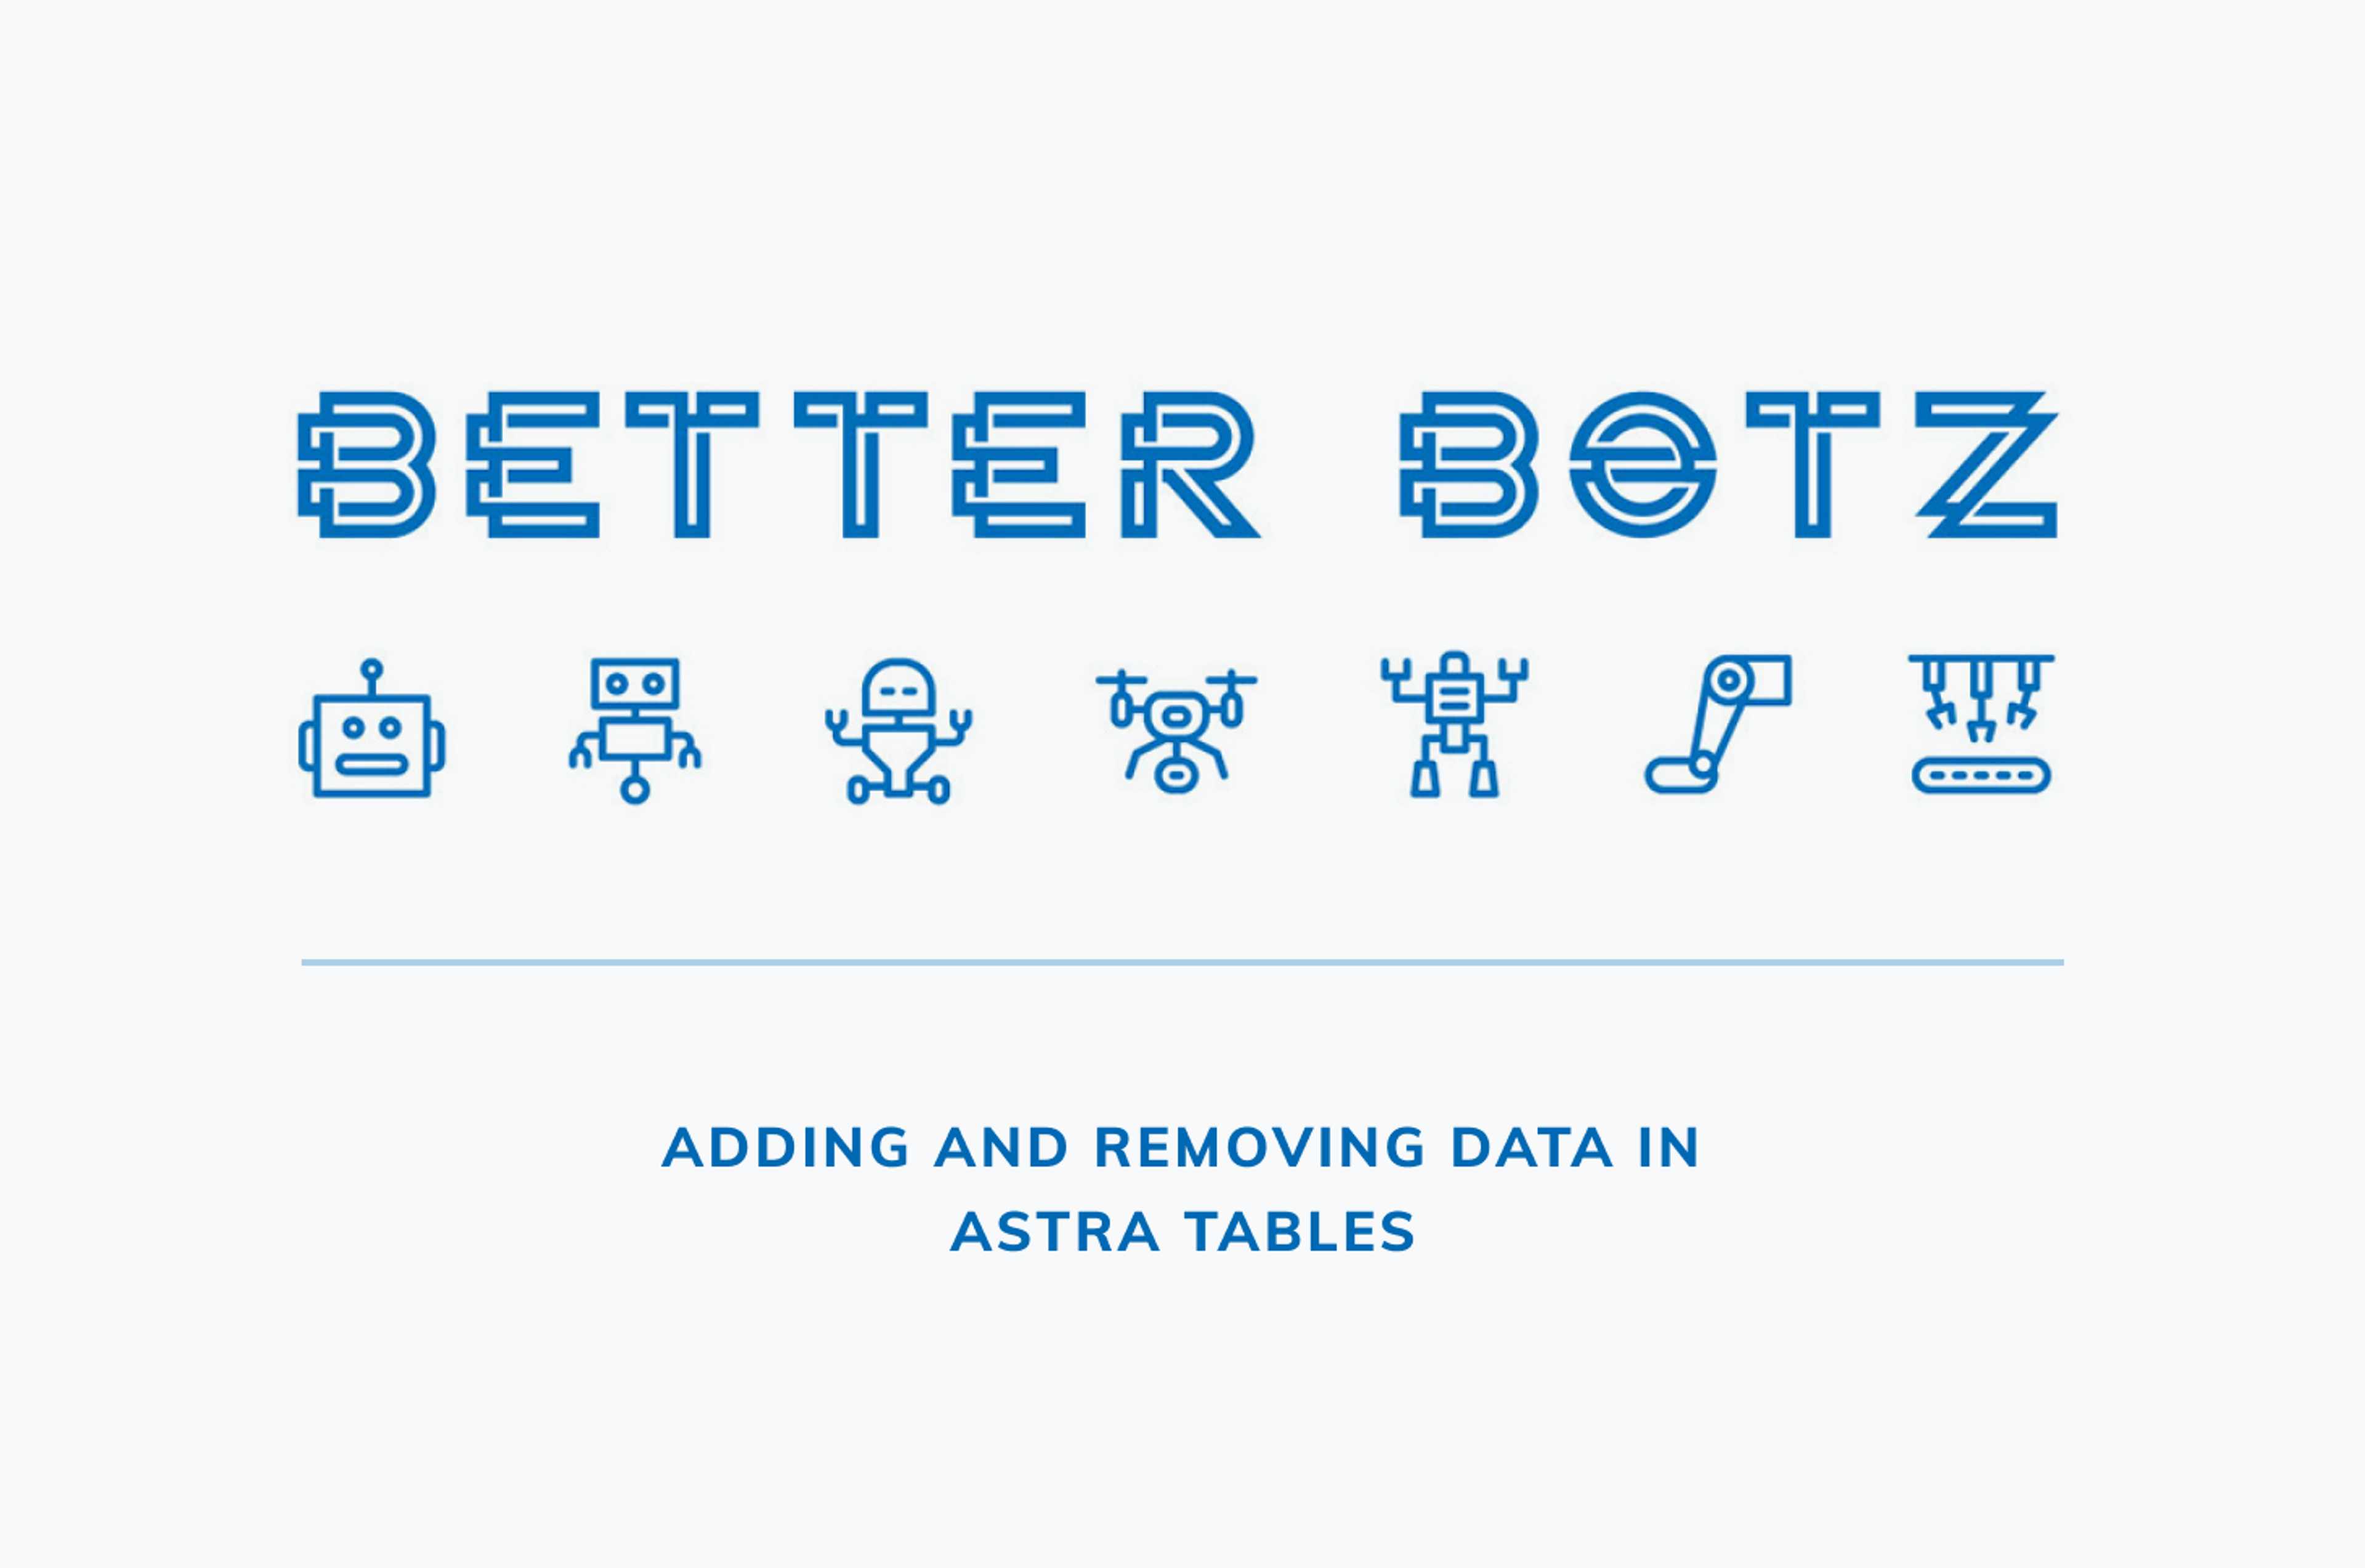 Adding and removing data in Astra tables